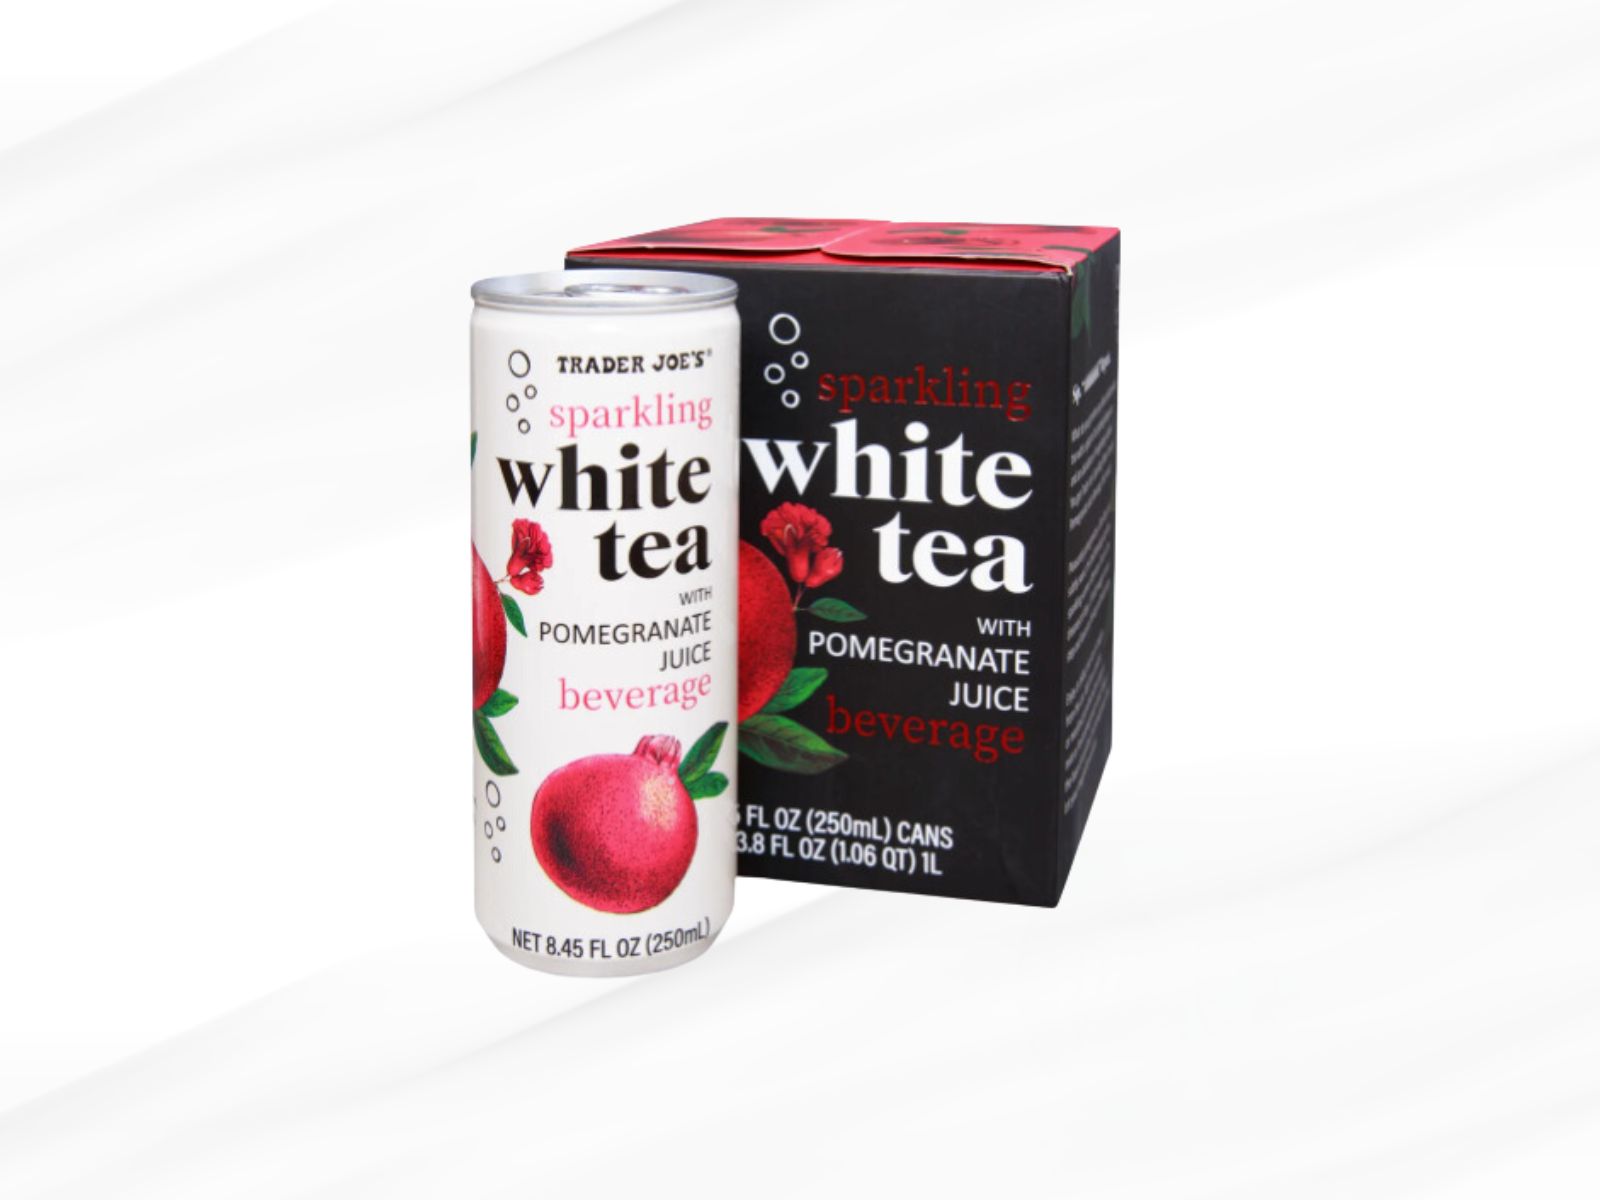 white tea from trader joes